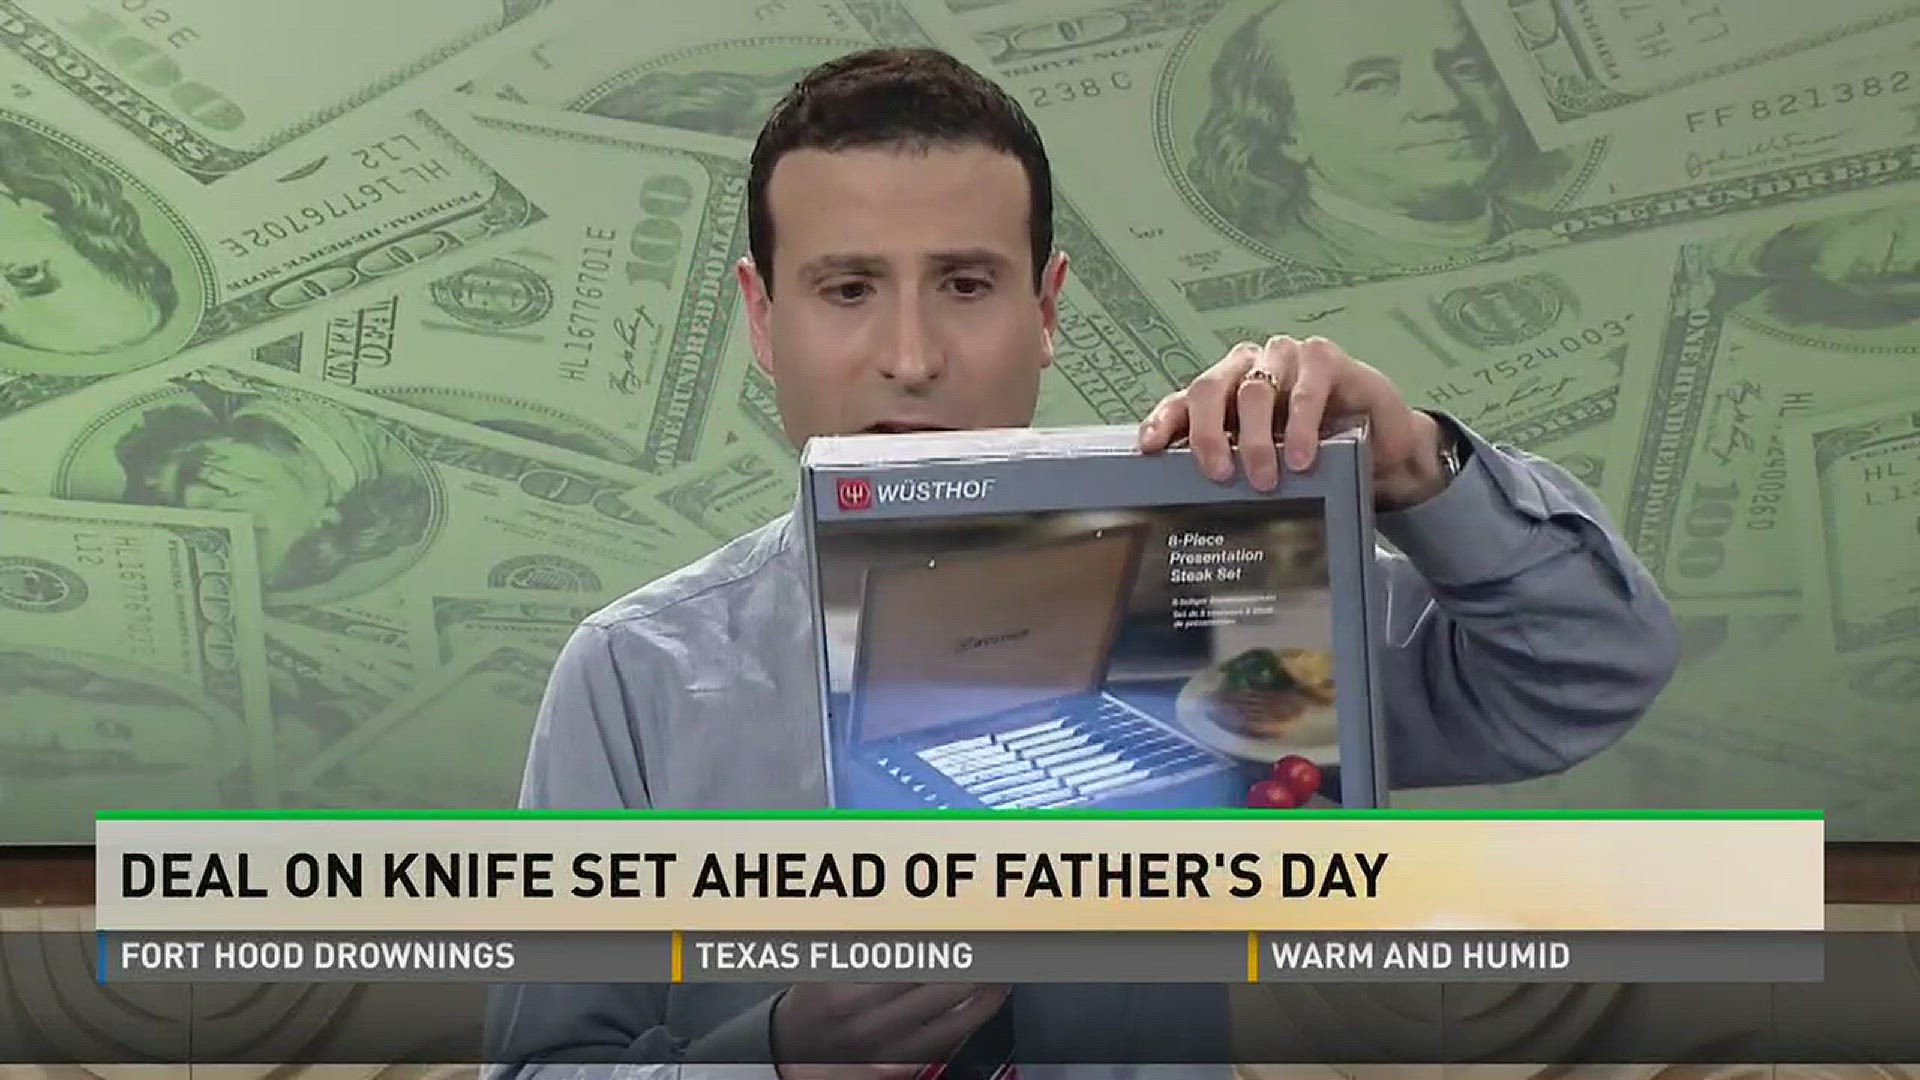 Money man Matt Granite shows how to save on a knife set ahead of Father's Day.